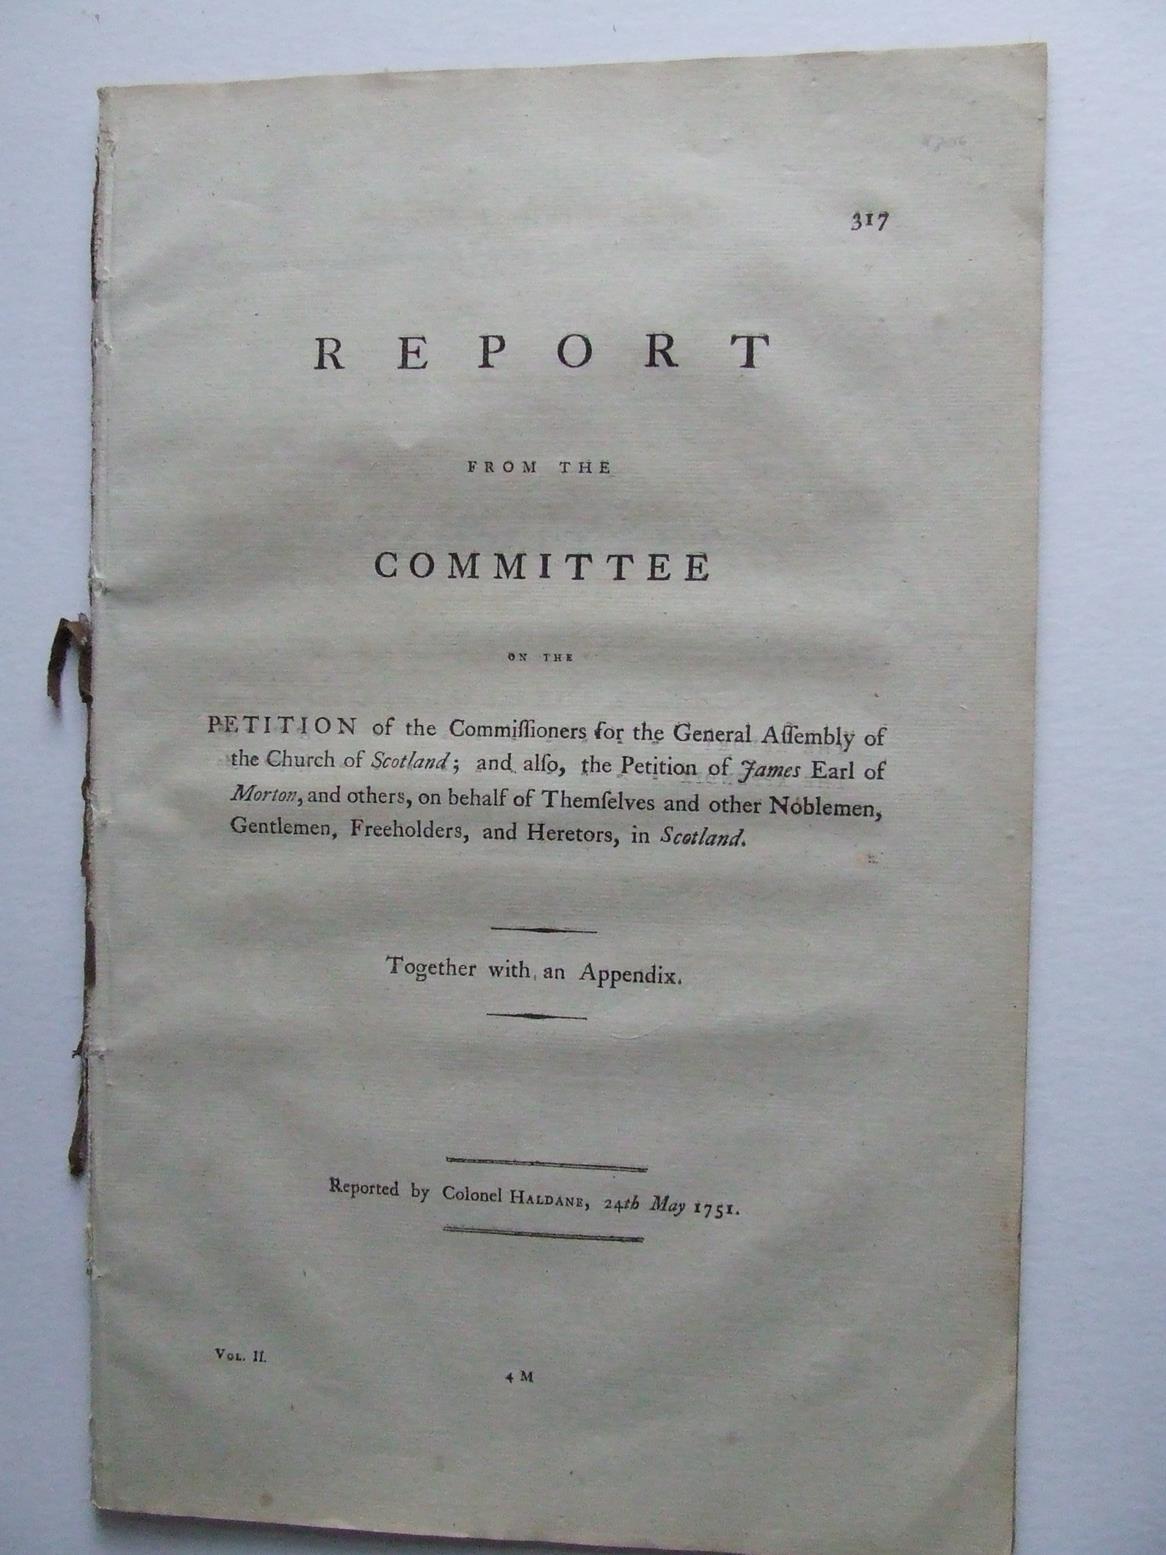 Report from the Committee to whom the petition of the Commissioners for the General Assembly of the Church of Scotland